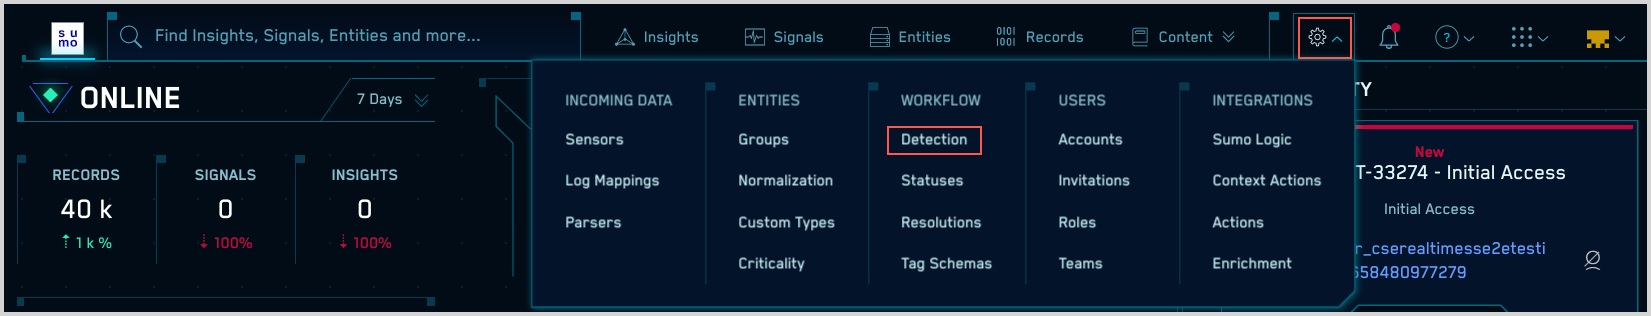 detection-link.png